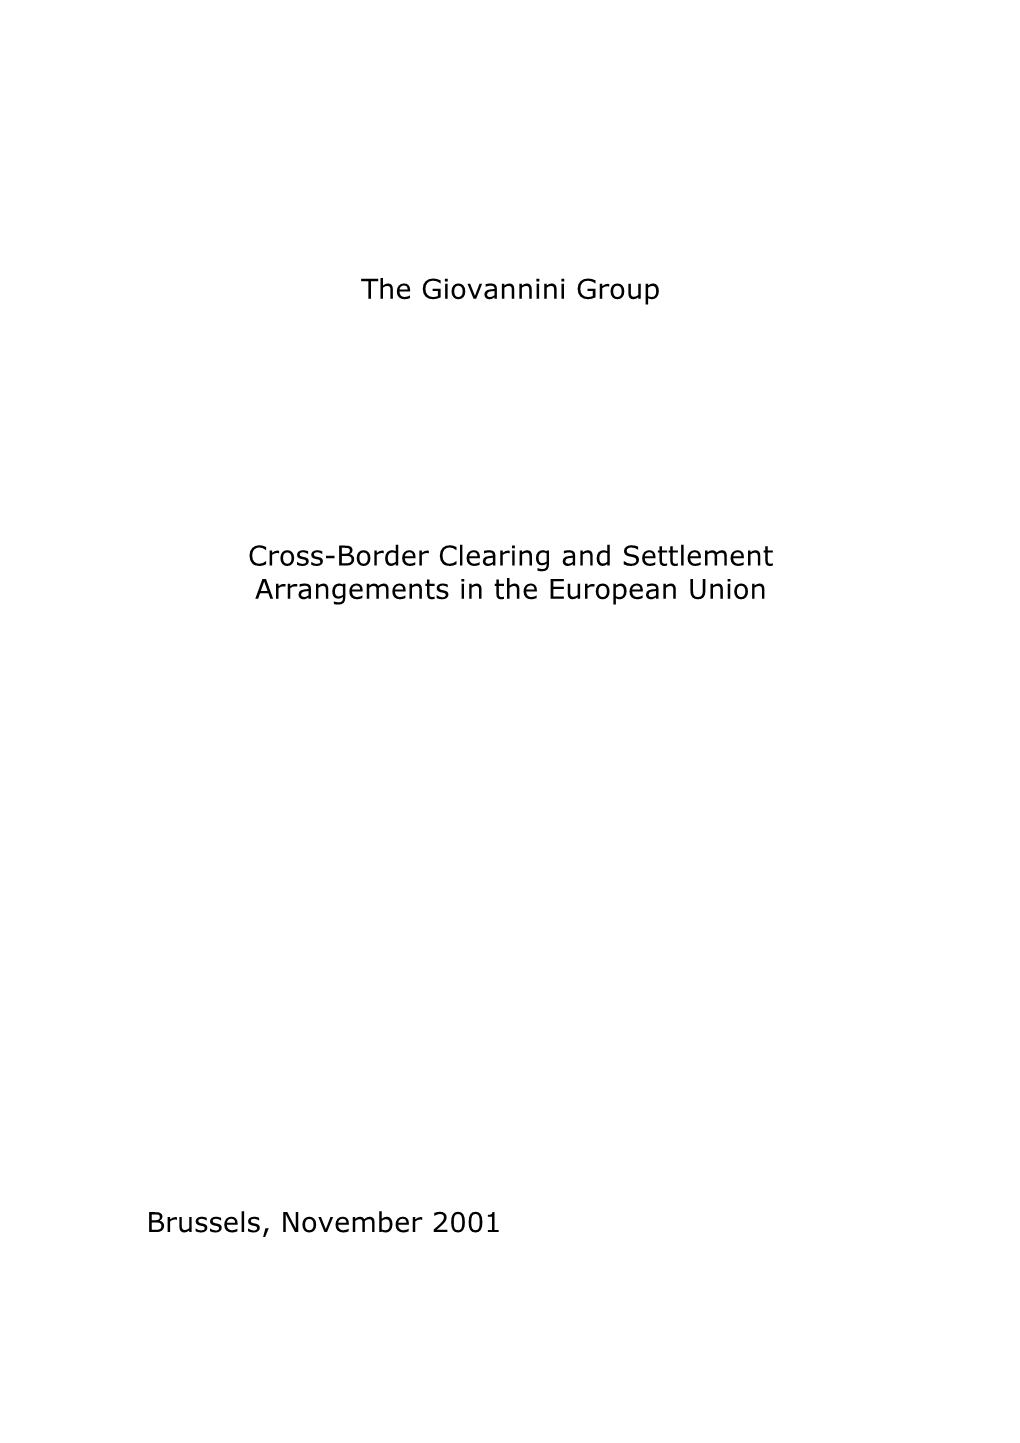 The Giovannini Group. Cross-Border Clearing and Settlement